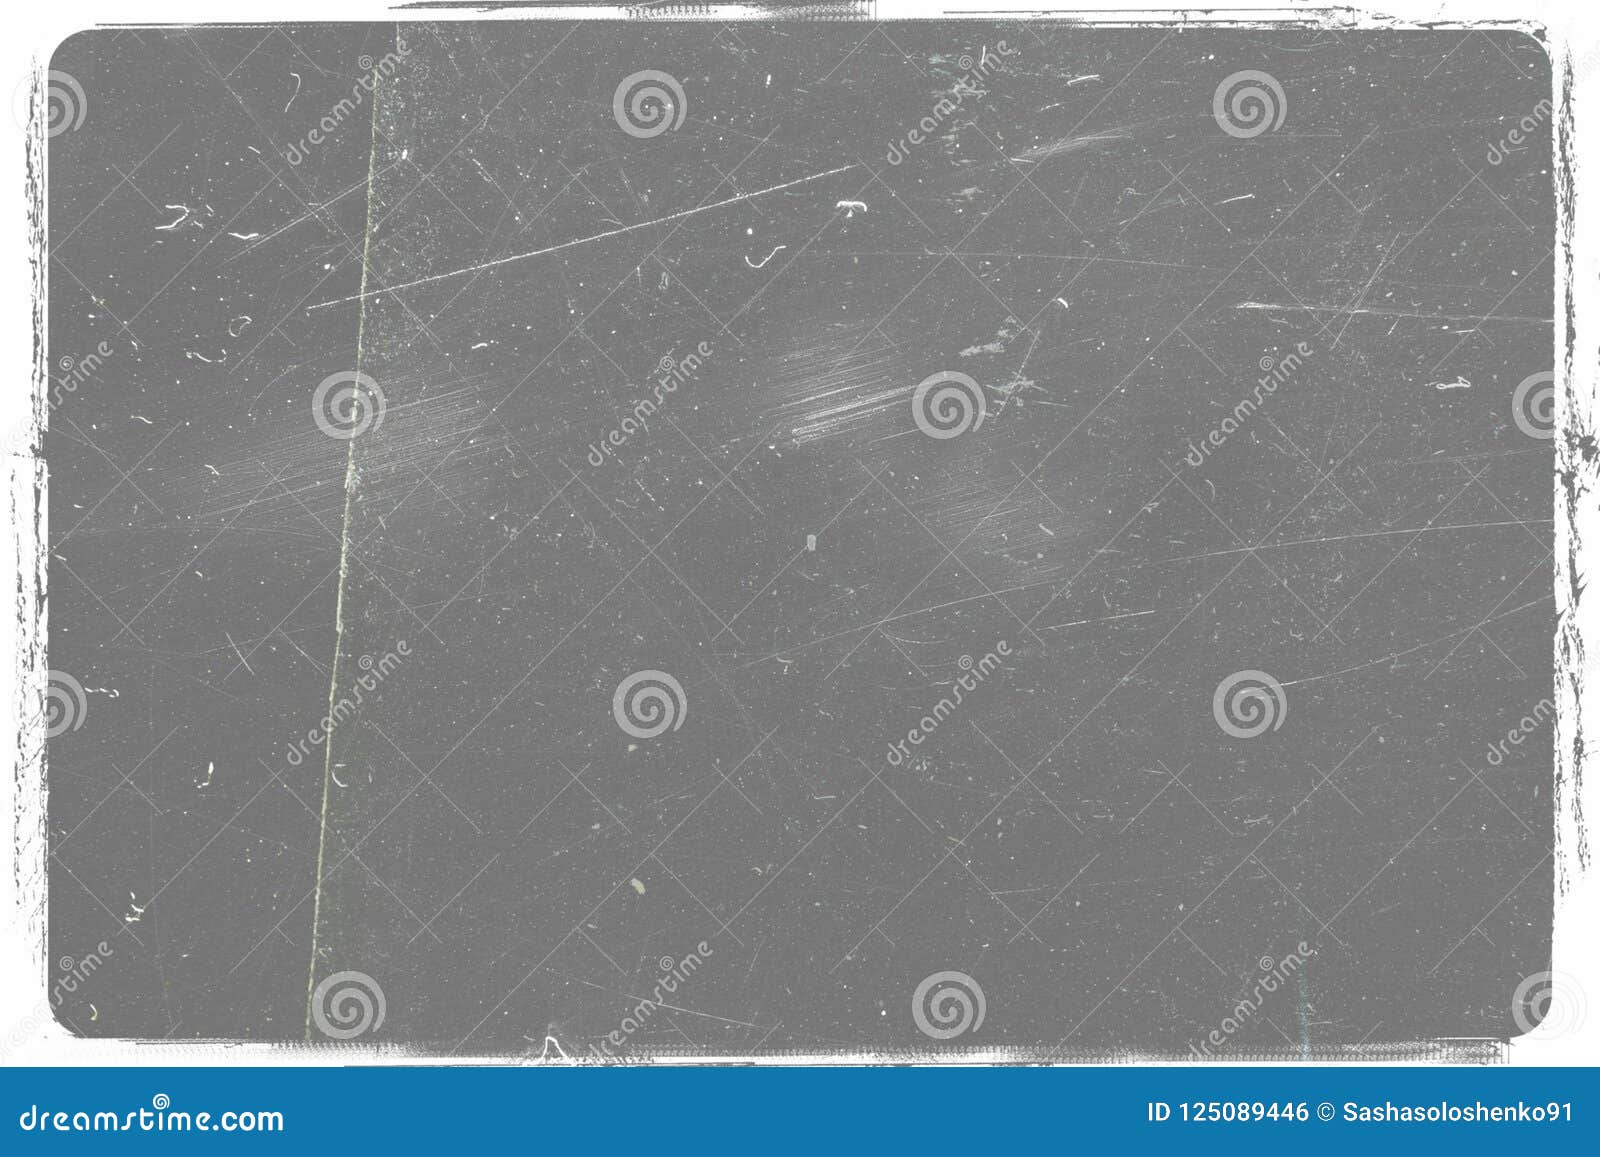 abstract grey grunge background-texture, worn old surface